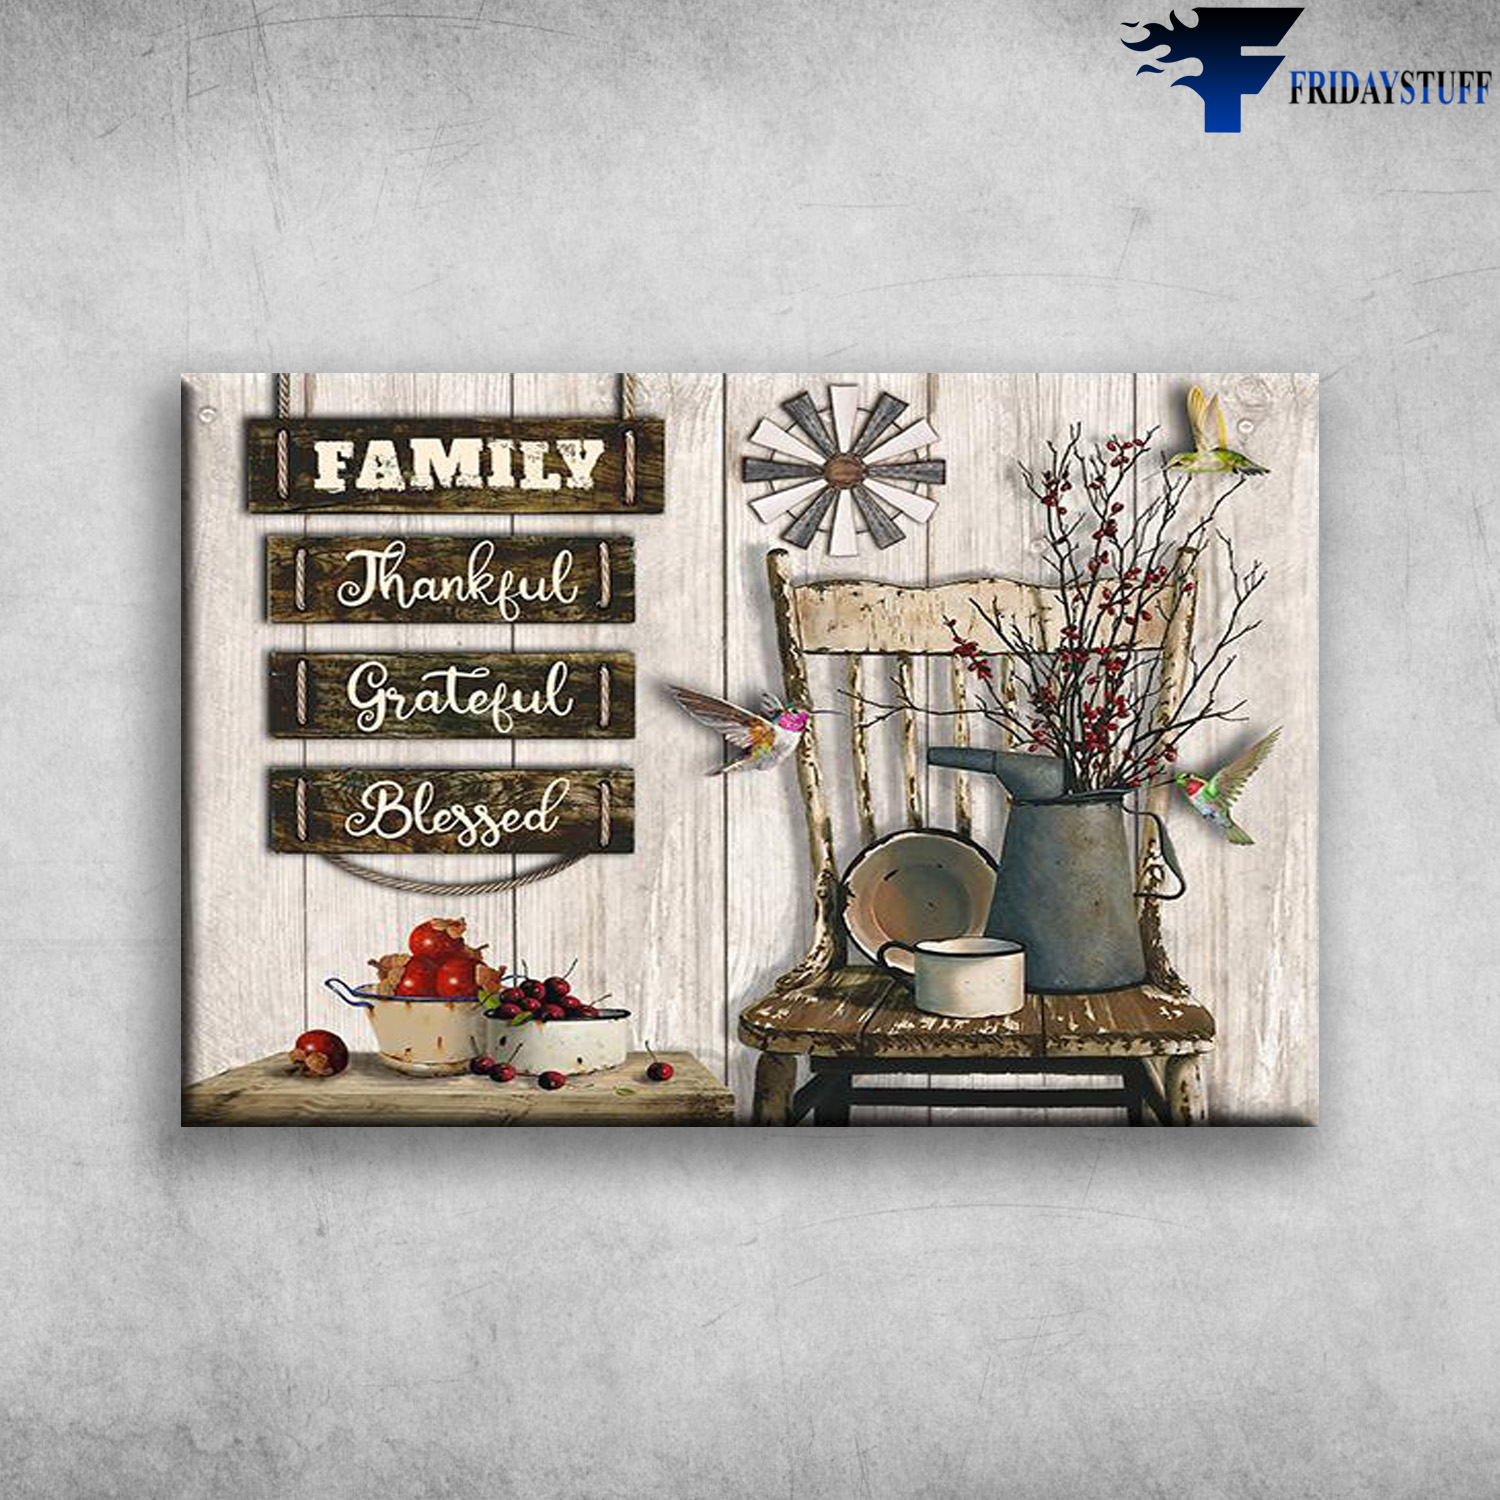 Hayooo Primitive Still Life Canvas With Hummingbirds Family, Thankful, Grateful, Blessed, Wall Art For Farmhouse Decor